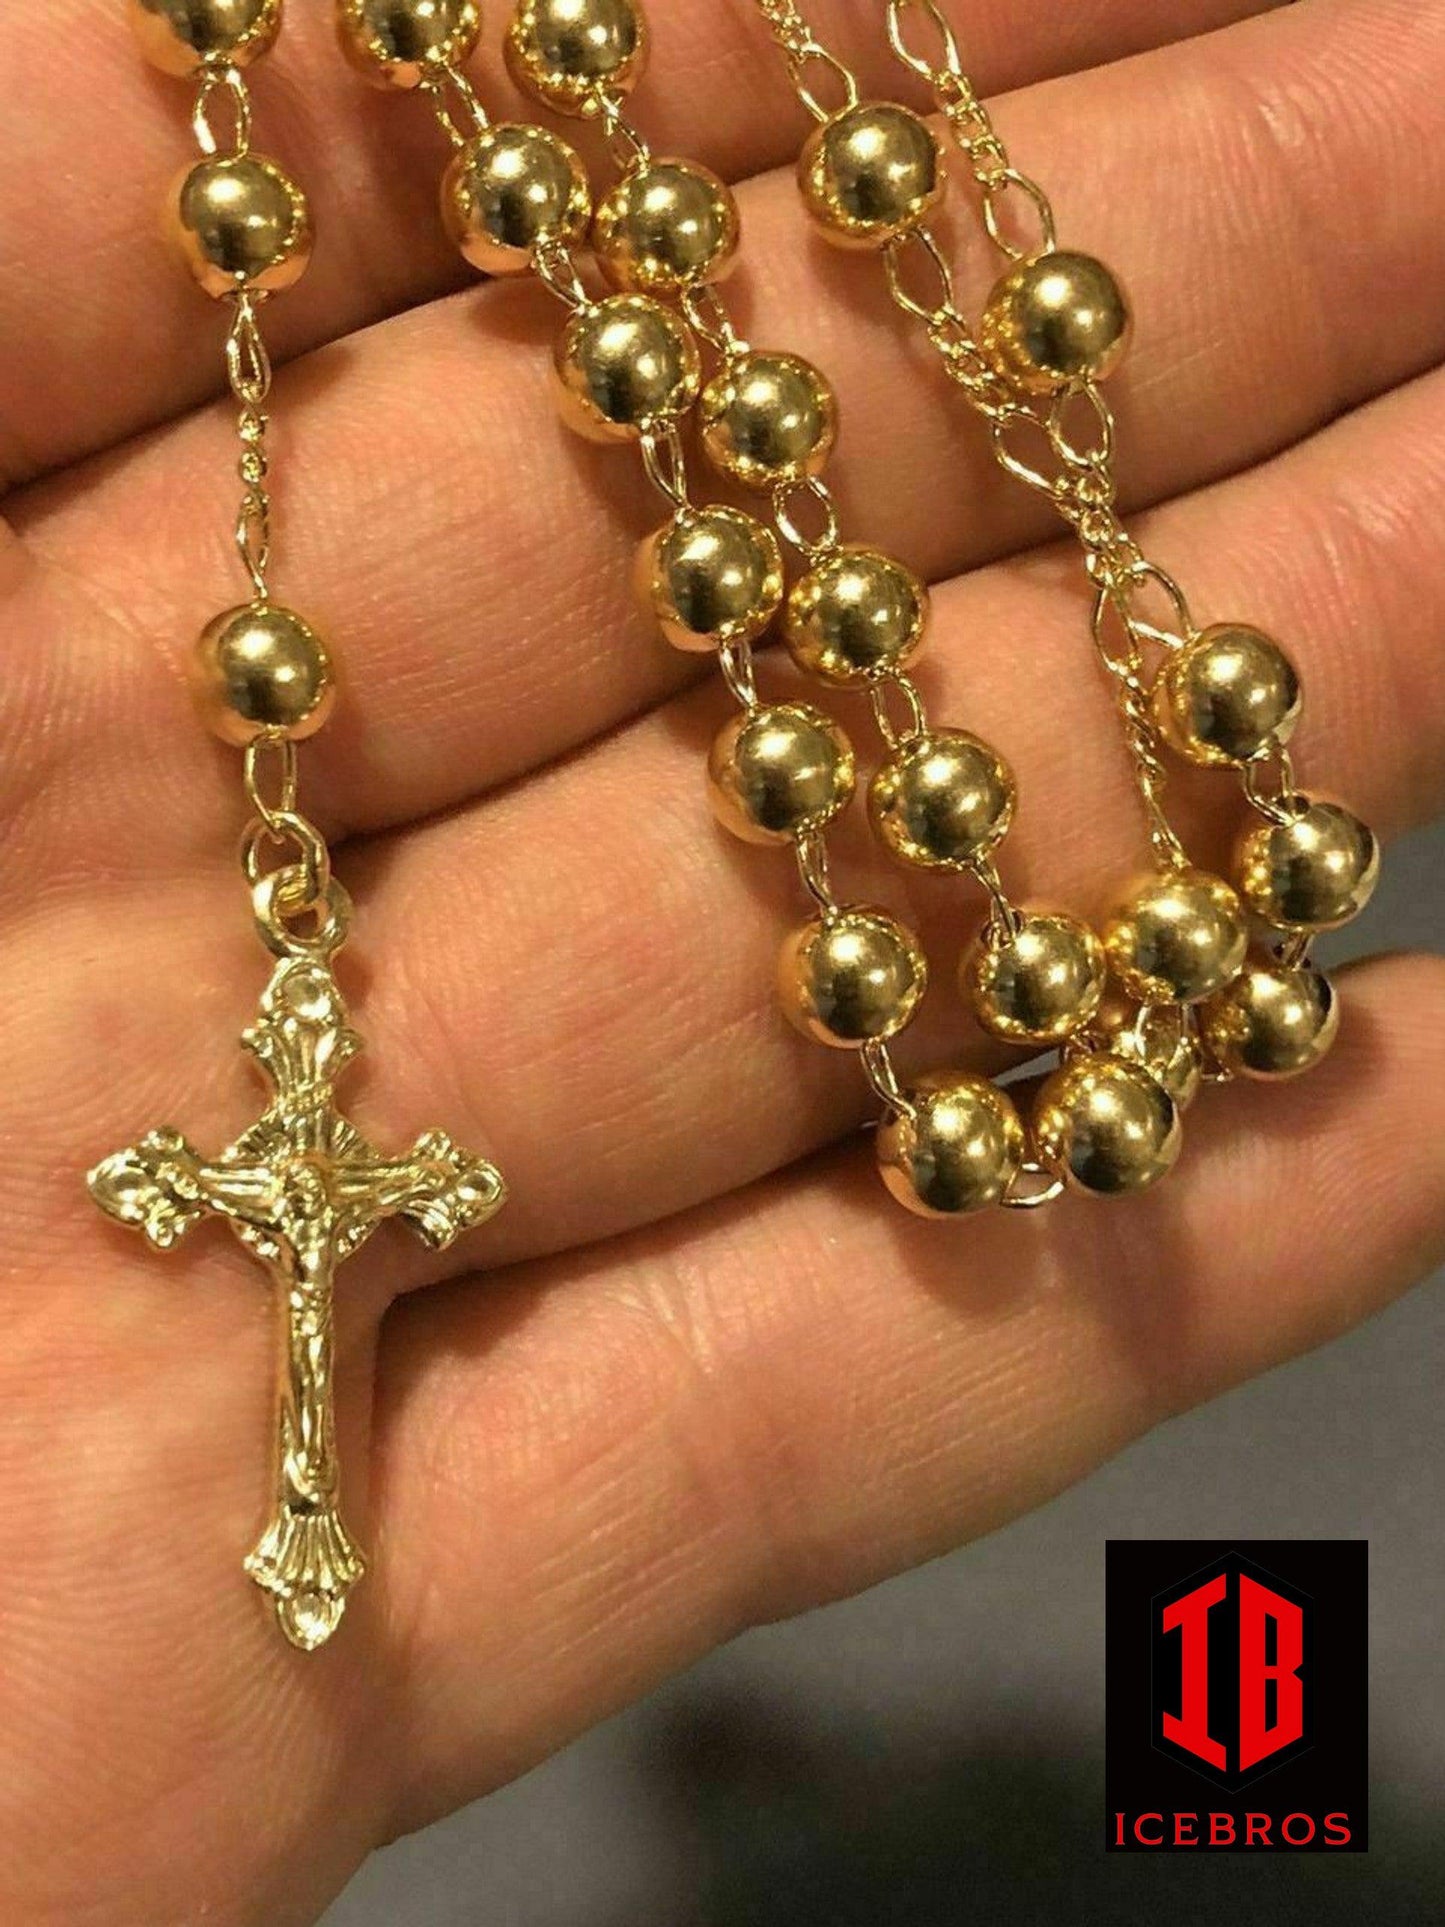 6mm Rosary Beads Necklace 24” 14k Gold Over Solid 925 Sterling Silver Unisex Italy